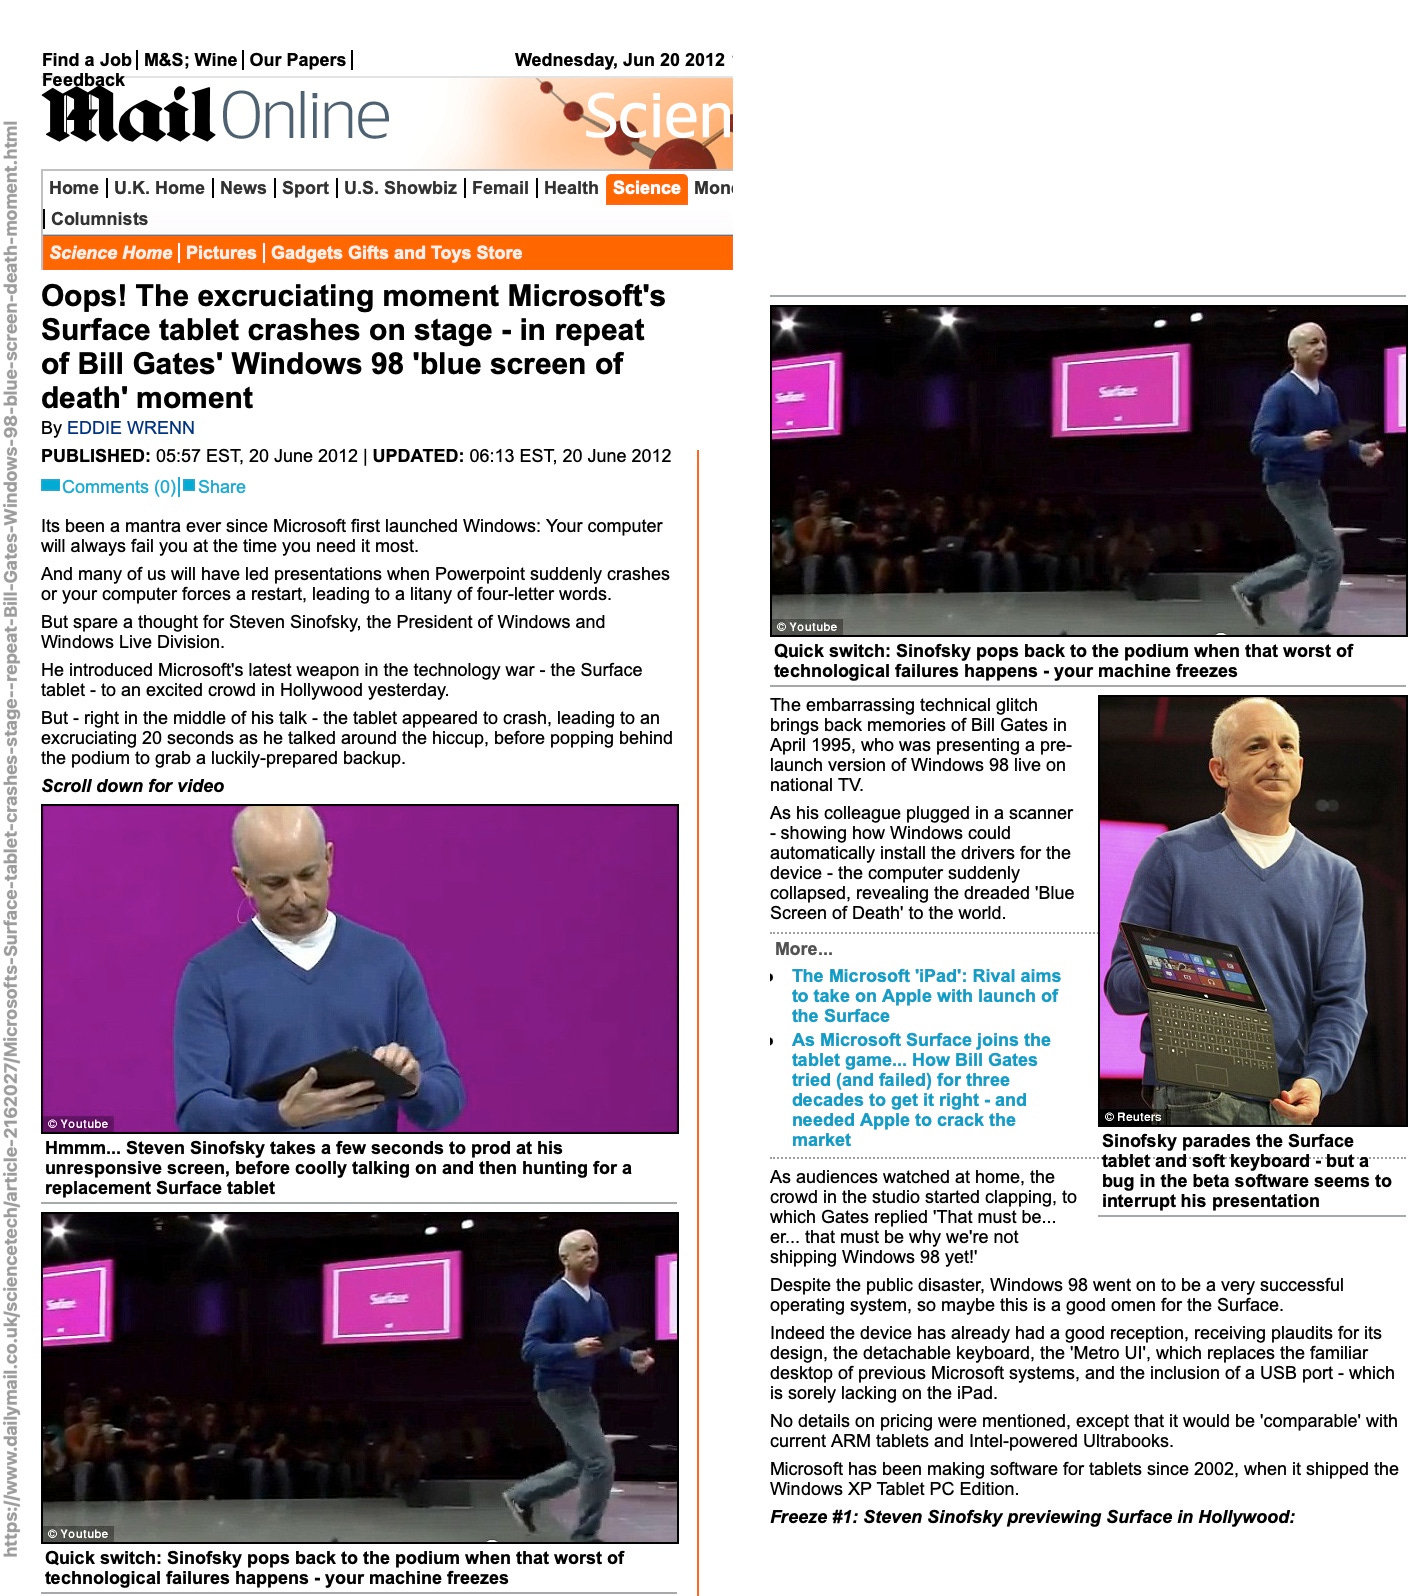 mailOnline Wednesday, Jun 20 2012 • Scien  E me mol 8 repeat-Bi Gates-' dows-  00 Home U.K. Home News Sport U.S. Showbiz Femail Health Science Mon Columnists Science Home | Pictures Gadgets Gifts and Tovs Store Oops! The excruciating moment Microsoft's Surface tablet crashes on stage - in repeat of Bill Gates' Windows 98 'blue screen of death' moment By EDDIE WRENN PUBLISHED: 05:57 EST, 20 June 2012 | UPDATED: 06:13 EST, 20 June 2012 •Comments (0) _ Share Its been a mantra ever since Microsoft first launched Windows: Your computer will always fail you at the time you need it most. And many of us will have led presentations when Powerpoint suddenly crashes or your computer forces a restart, leading to a litany of four-letter words. But spare a thought for Steven Sinofsky, the President of Windows and Windows Live Division. He introduced Microsoft's latest weapon in the technology war - the Surface tablet - to an excited crowd in Hollywood yesterday. But - right in the middle of his talk - the tablet appeared to crash, leading to an excruciating 20 seconds as he talked around the hiccup, before popping behind the podium to grab a luckily-prepared backup.